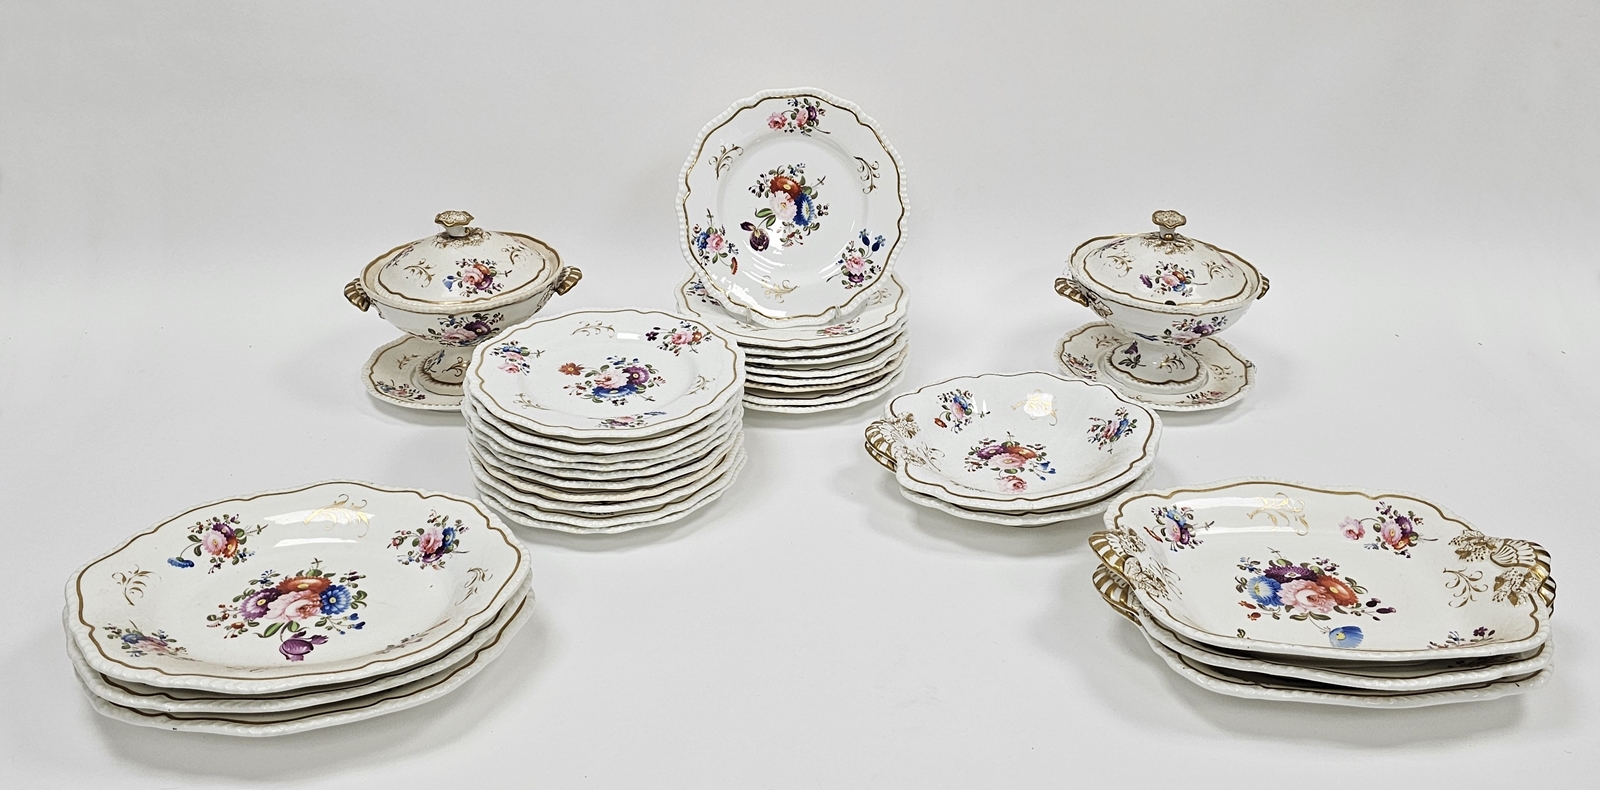 Staffordshire porcelain part dessert service, circa 1825, painted with bouquets of flowers within - Image 4 of 6